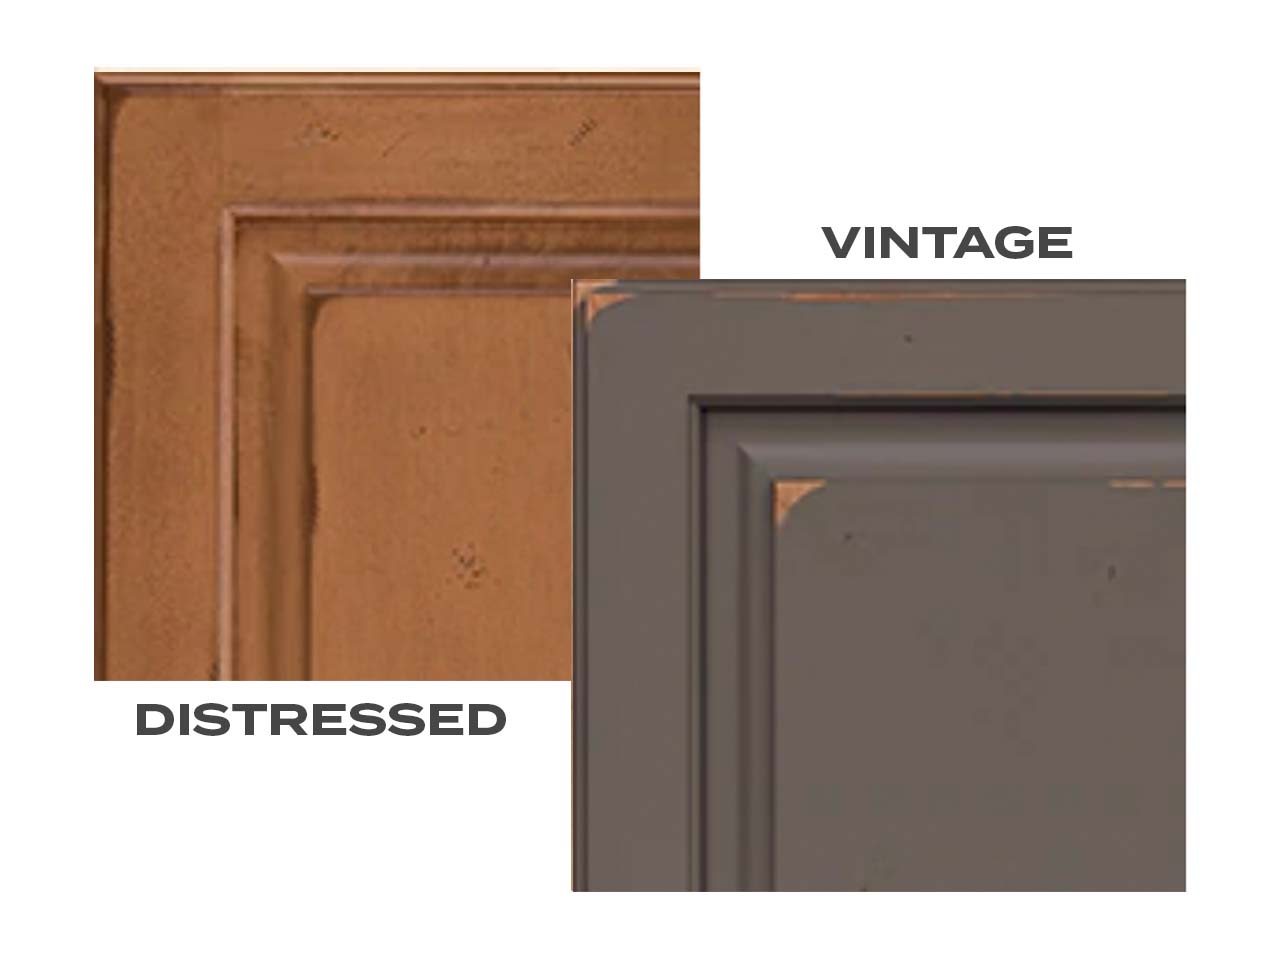 KraftMaid cabinet finishes in distressed and vintage